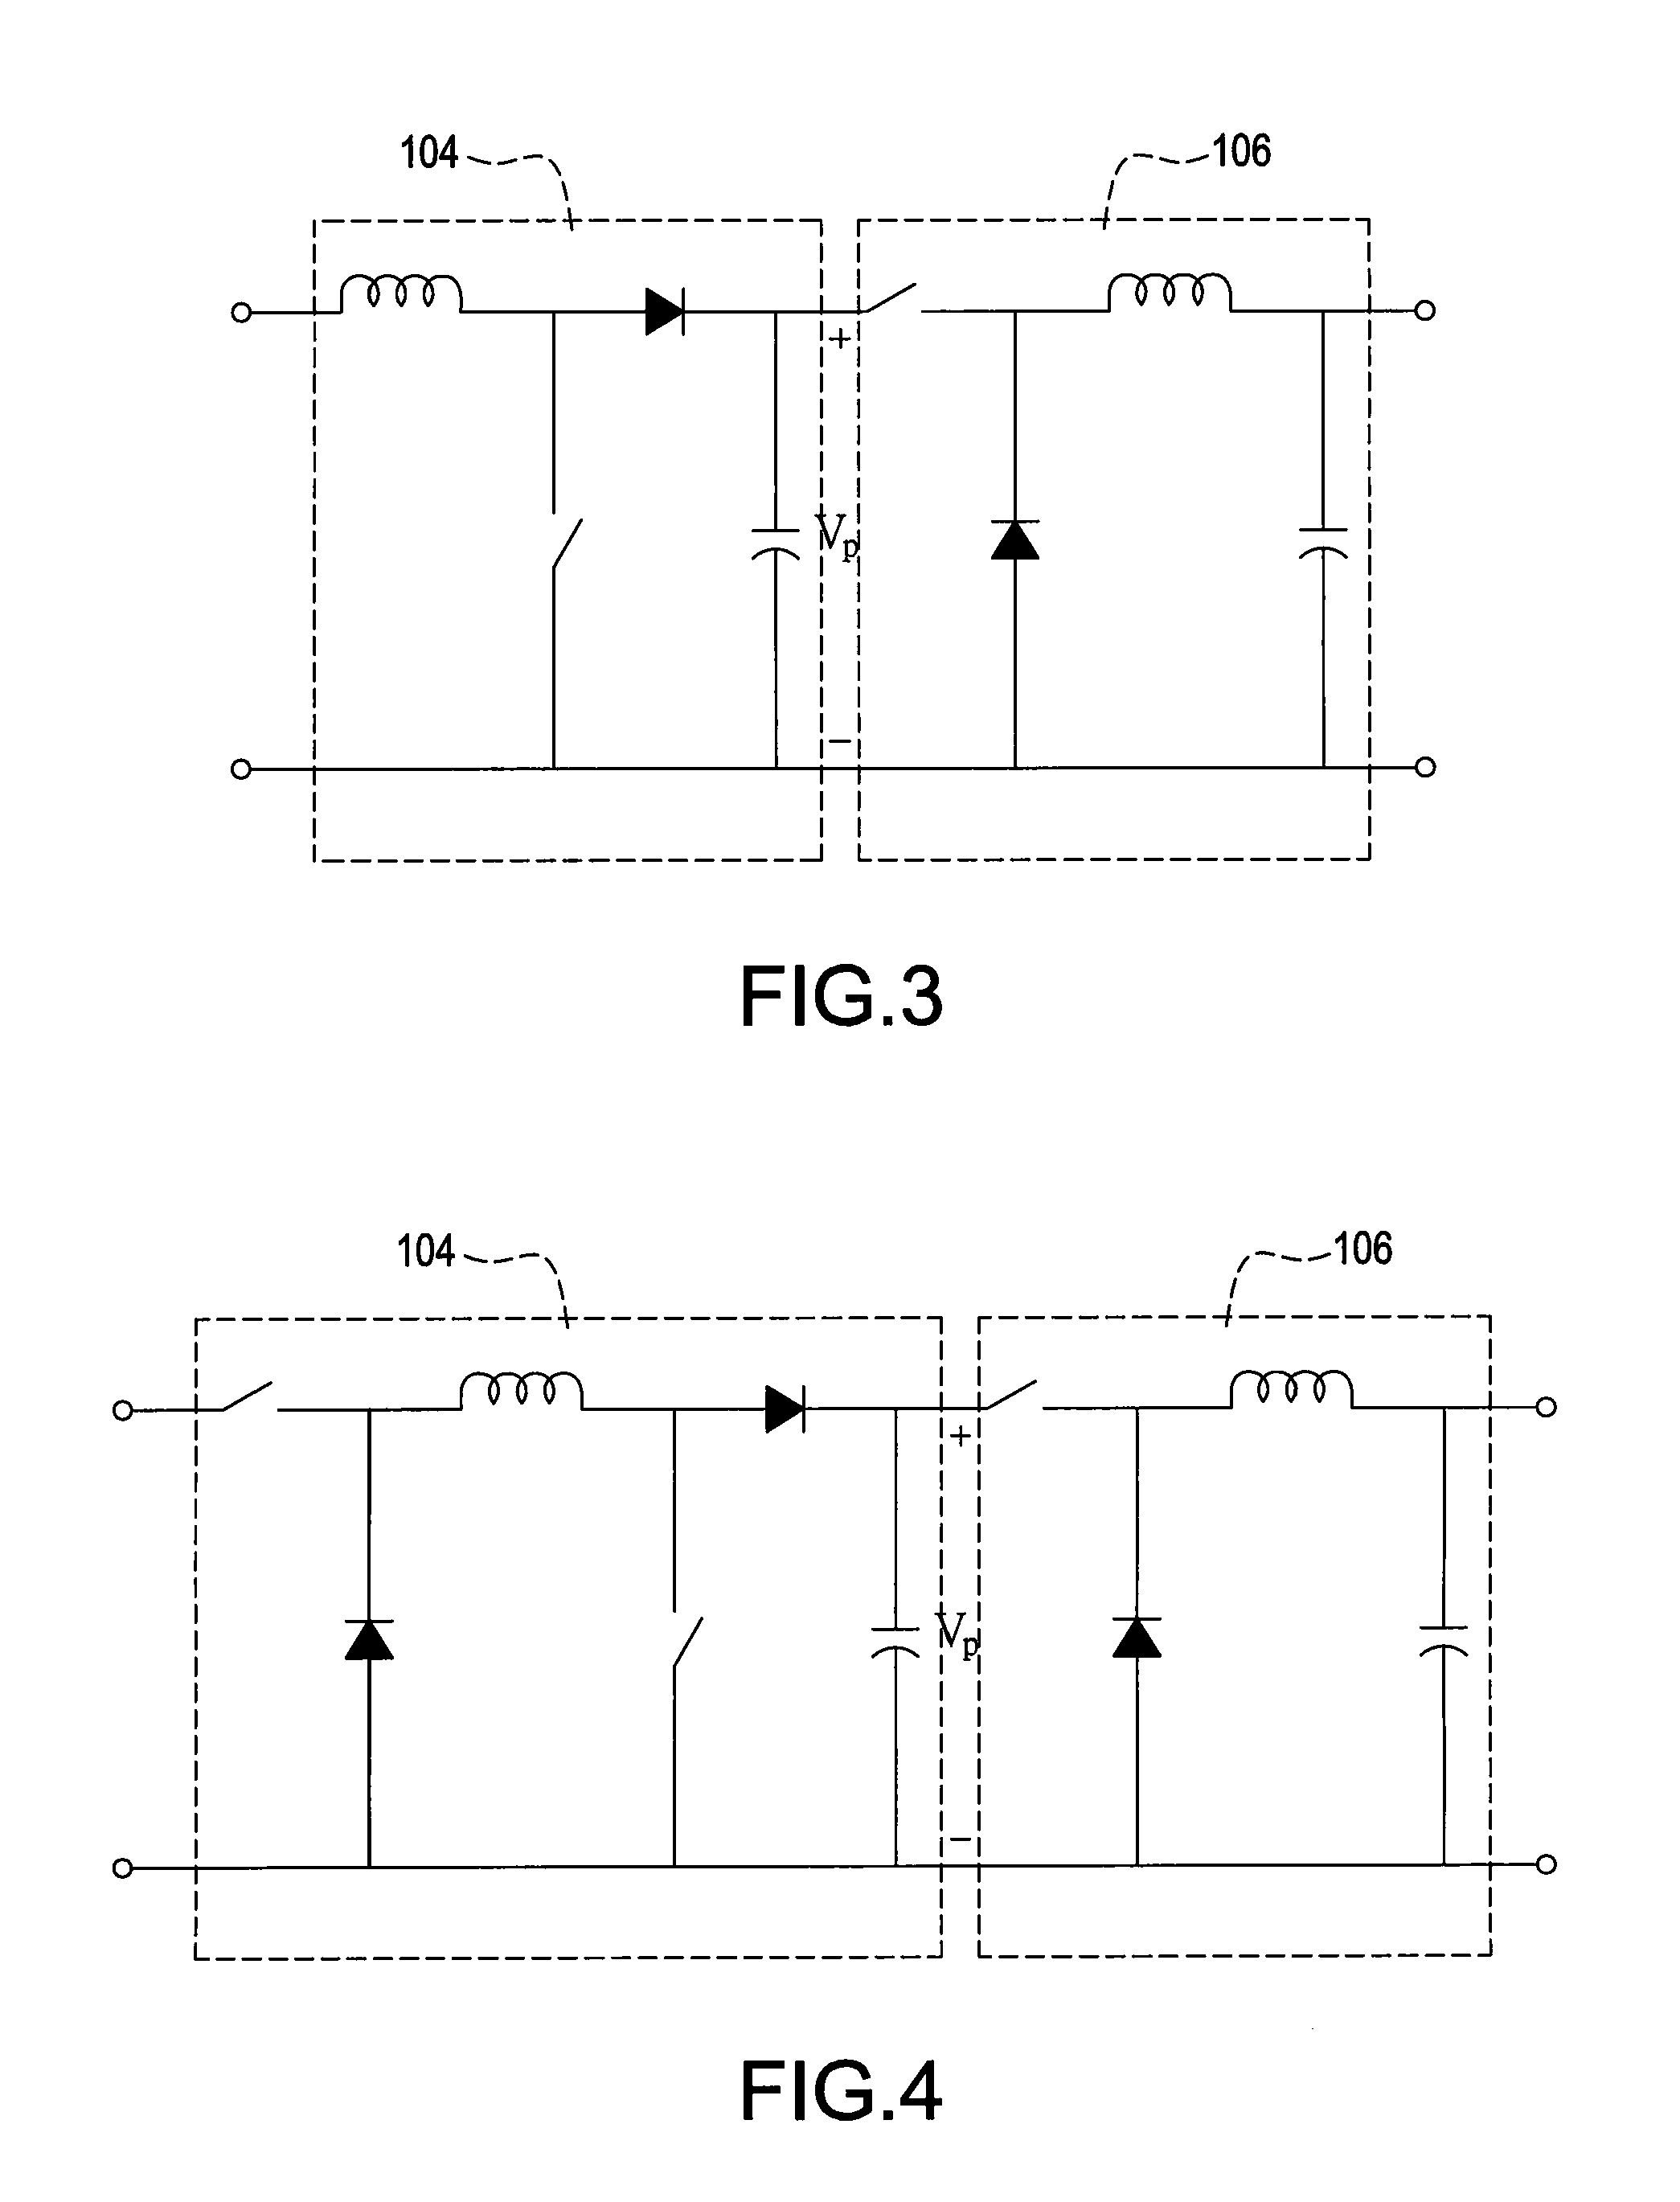 Charging apparatus of mobile vehicle